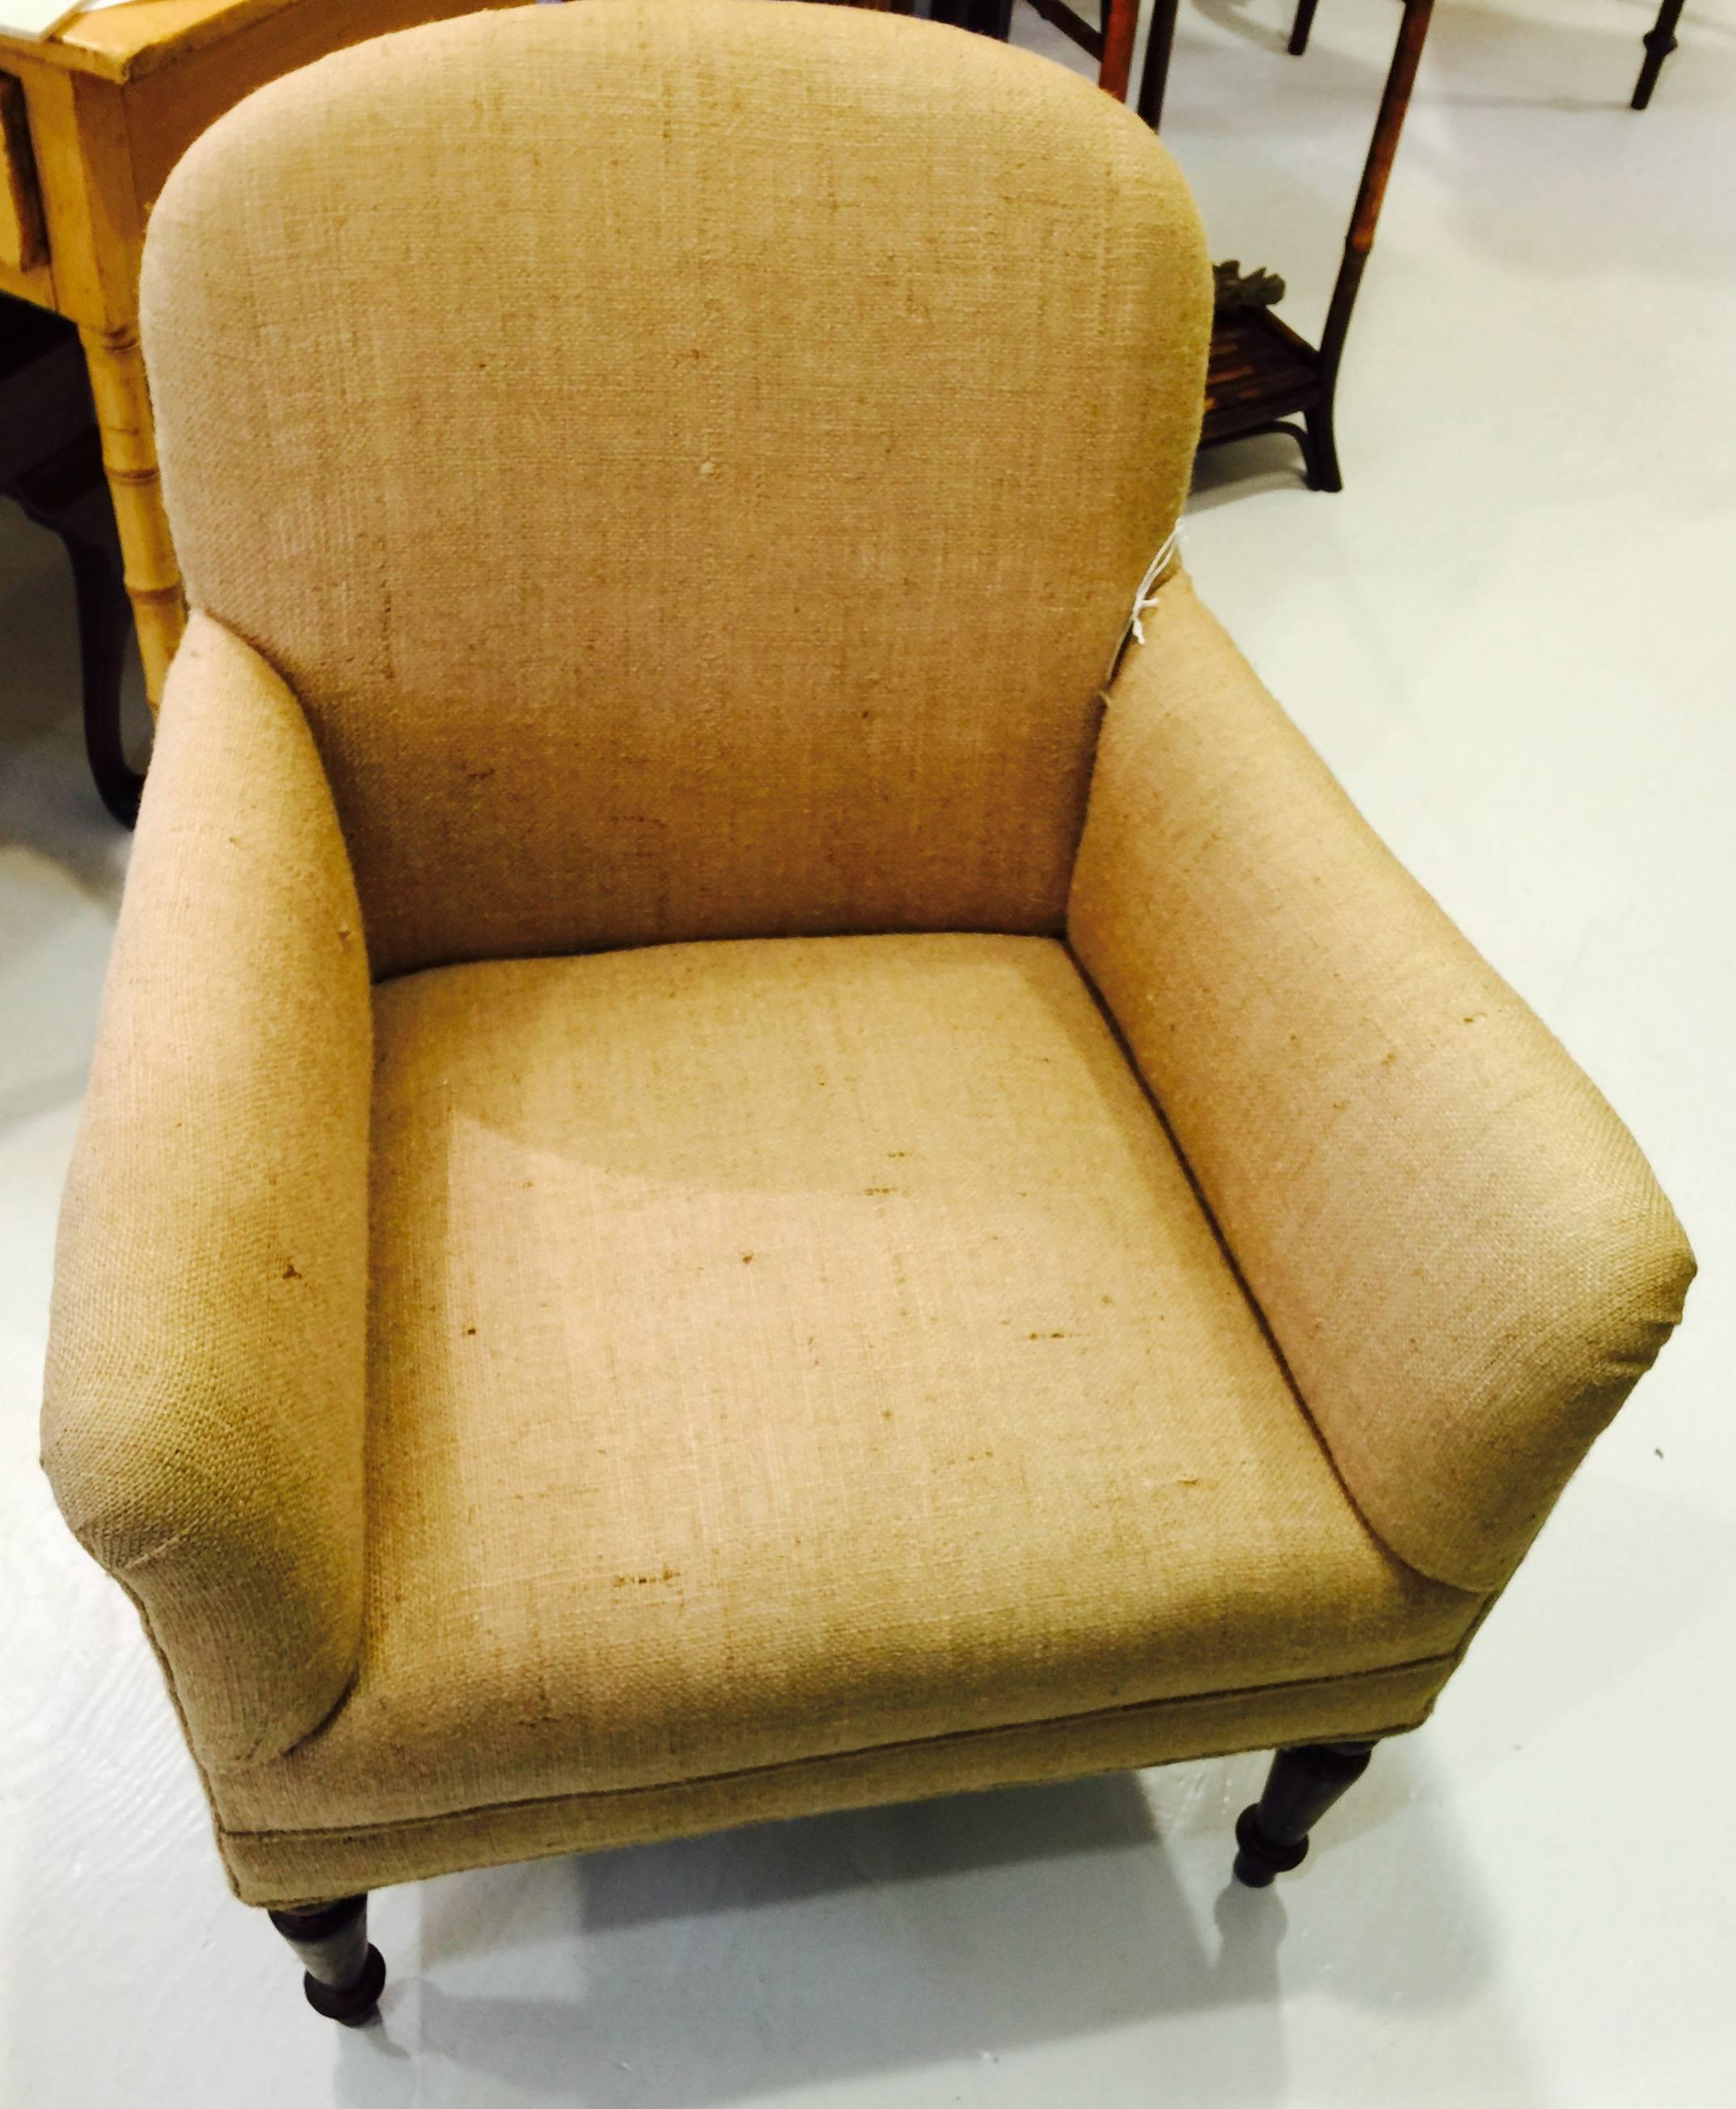 19th century English late Regency mahogany armchair.
New upholstered in burlap.
    